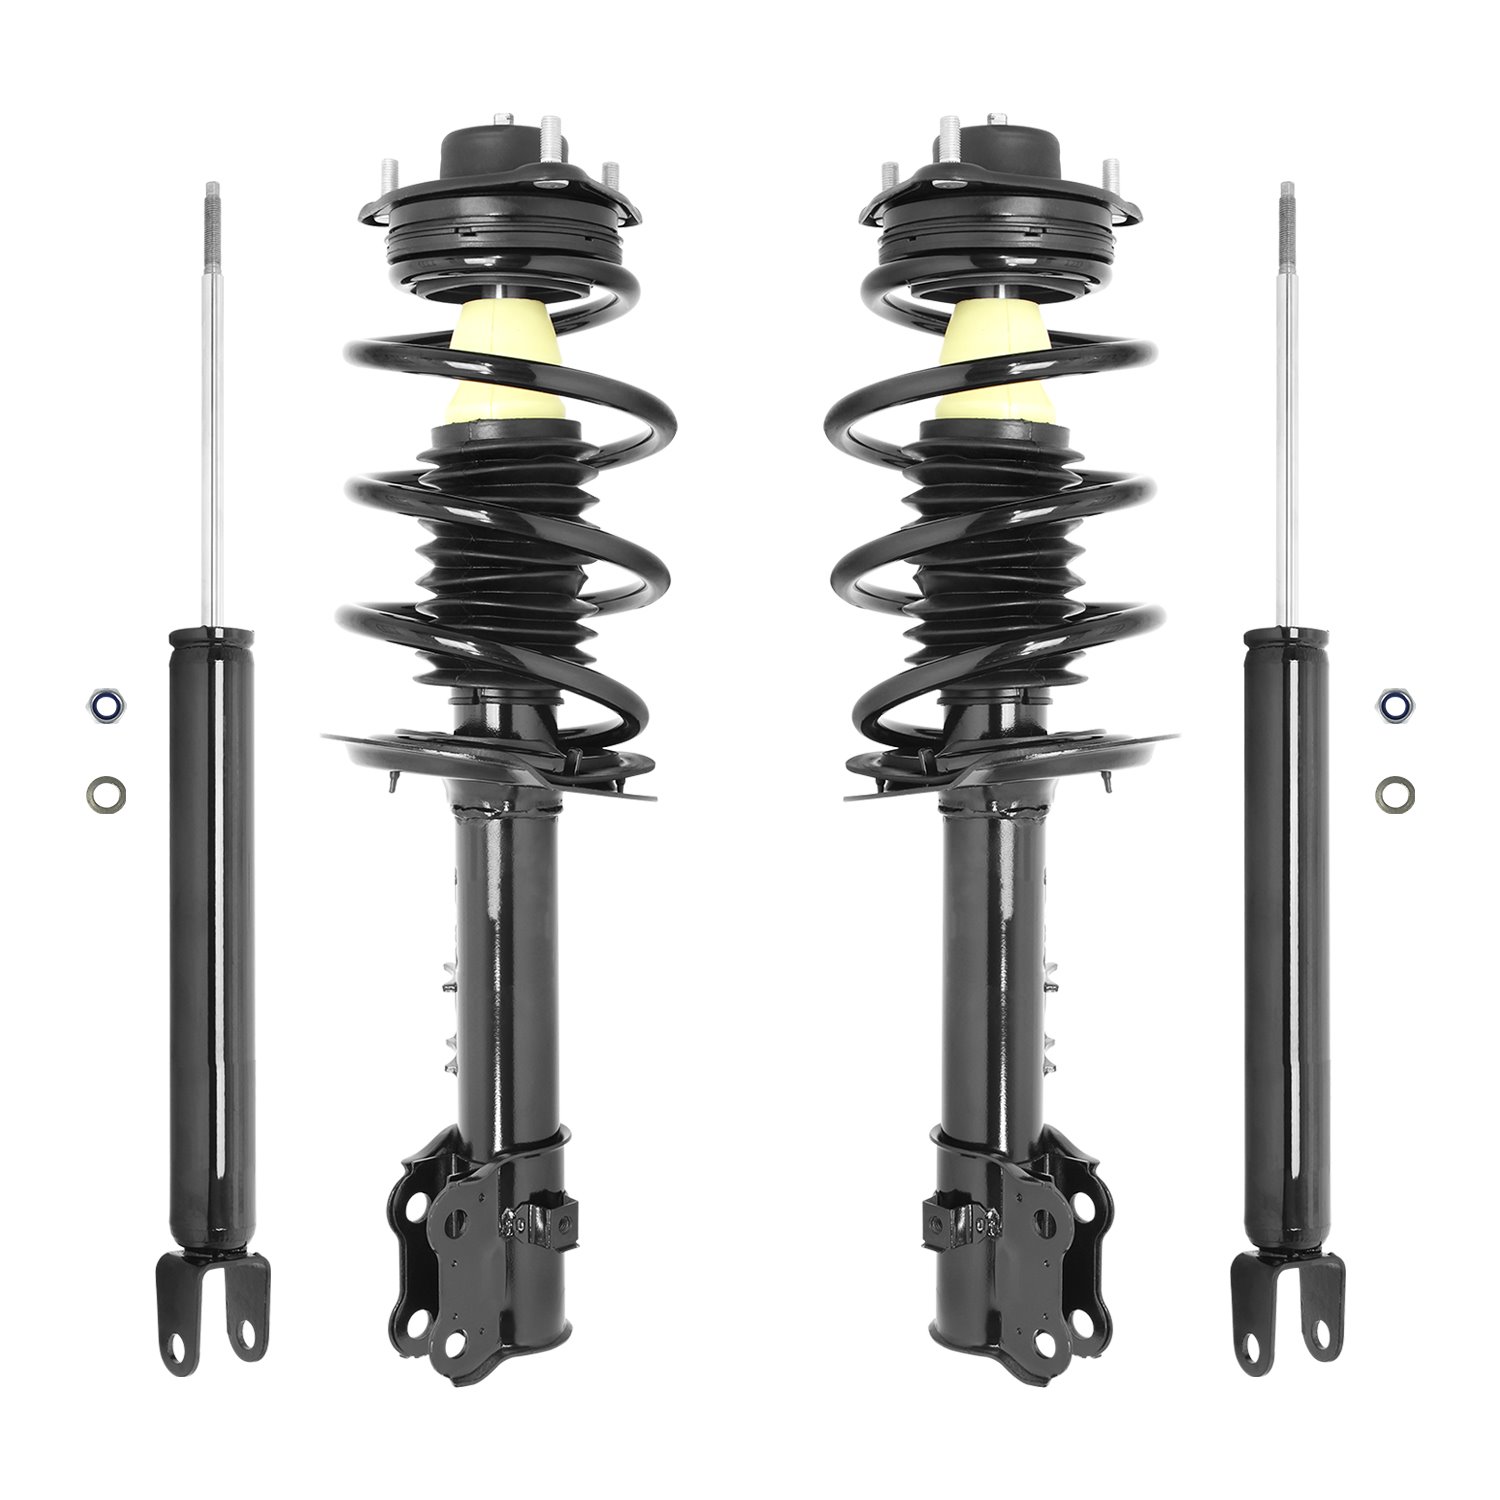 4-11745-259920-001 Front & Rear Suspension Strut & Coil Spring Assembly Fits Select Kia Sportage, Hyundai Tucson